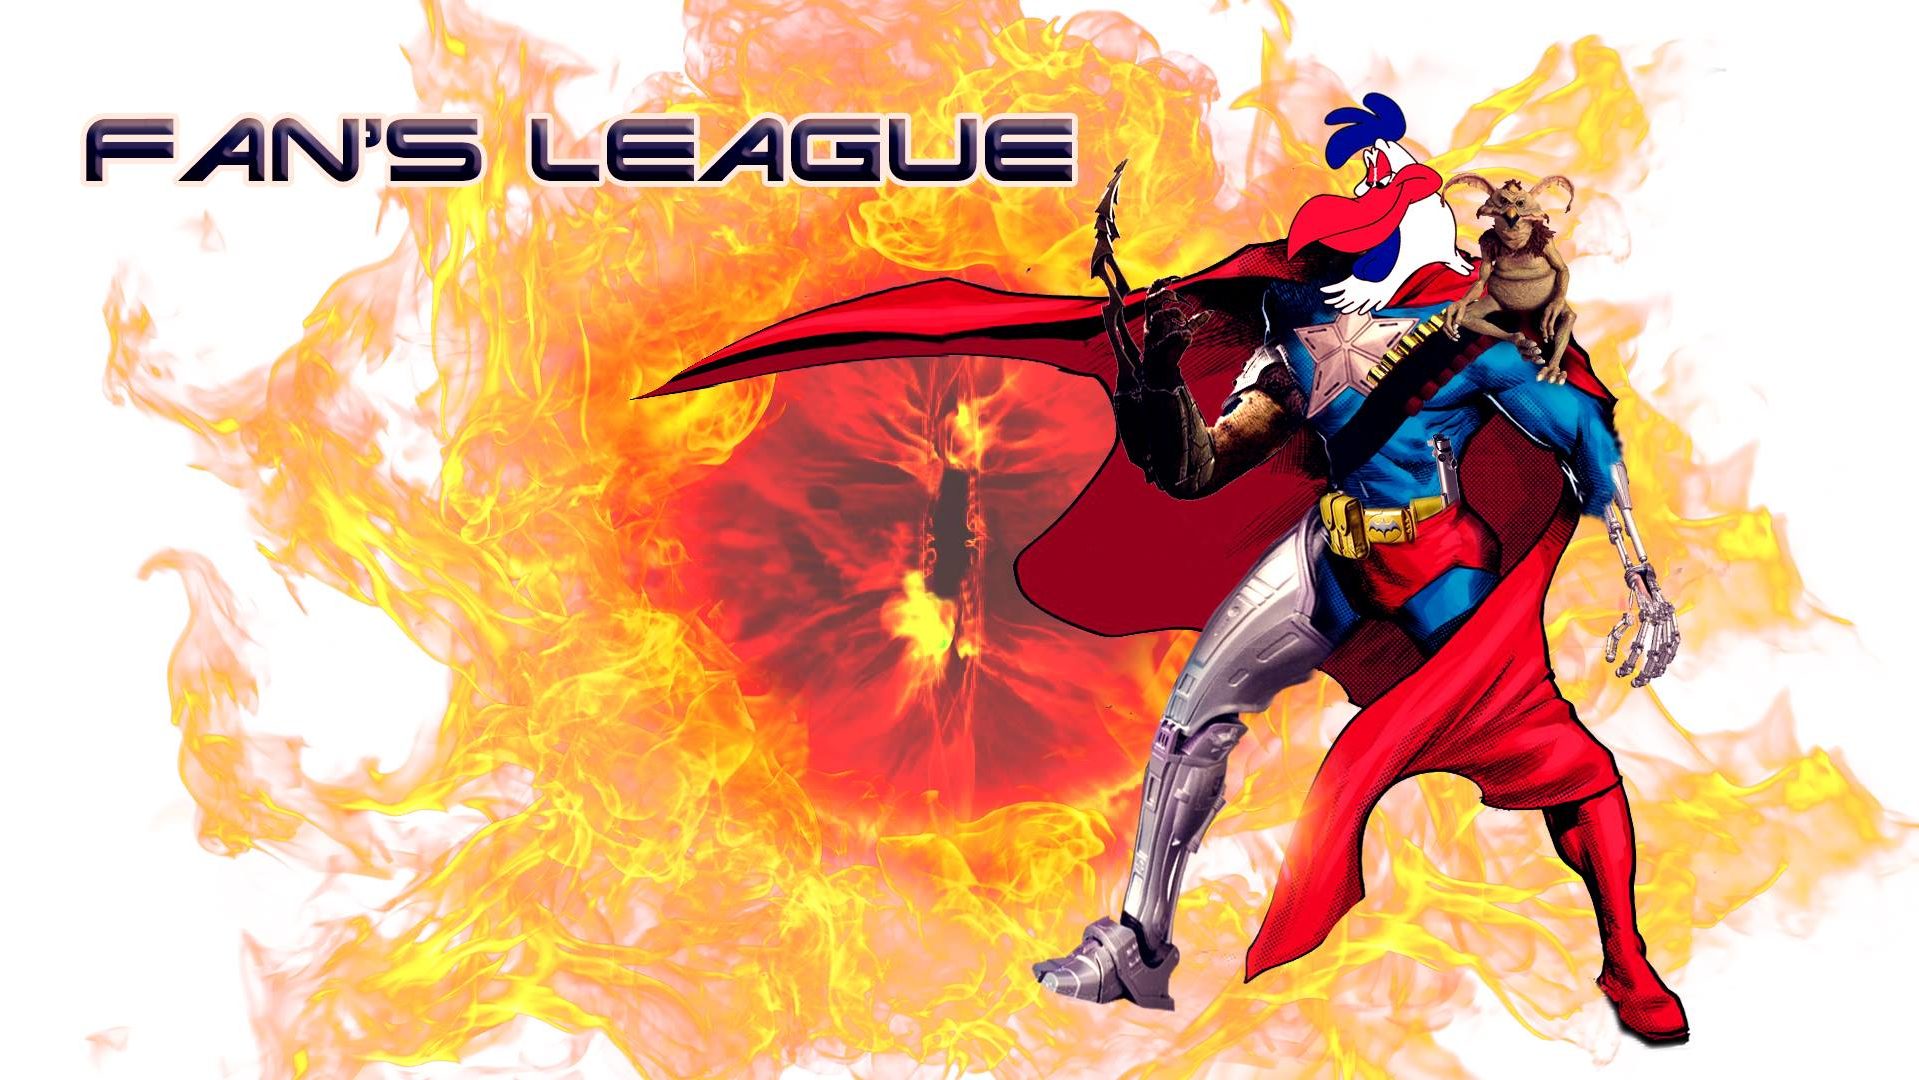 fan's league86, association, Poitiers, pictageek, pictasia, gaming, scifi, fantasy